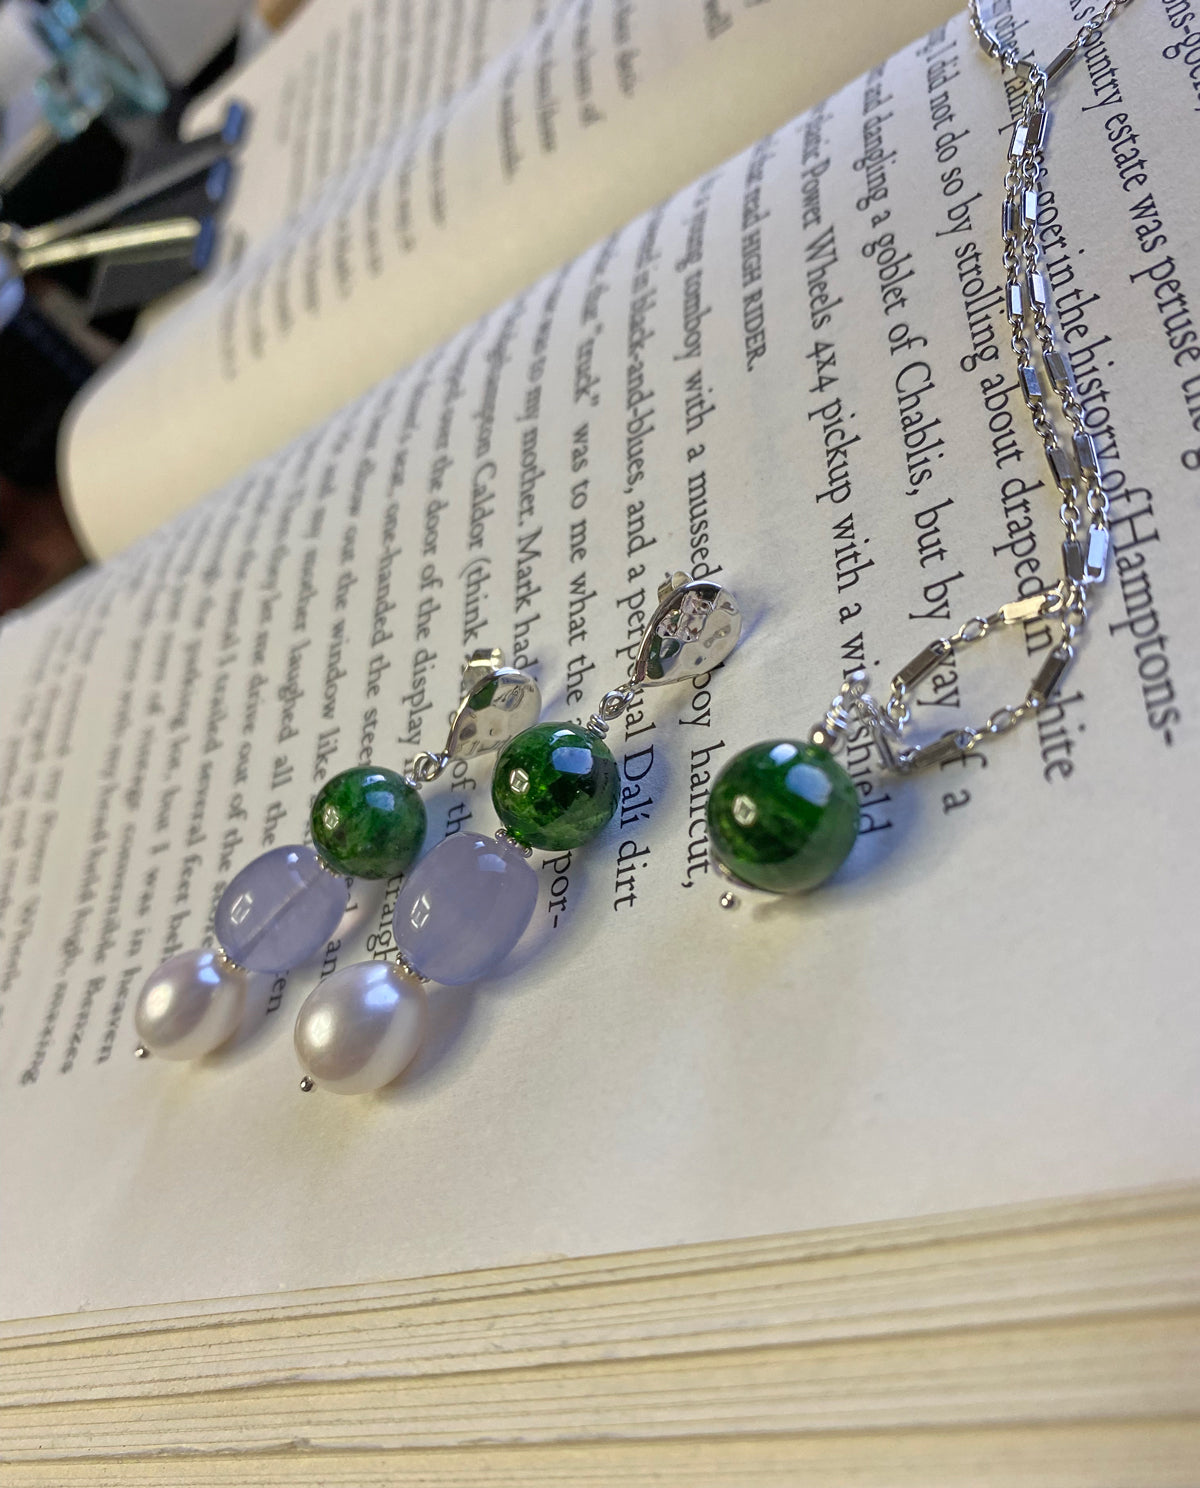 Chrome Diopside & Lavender Chalcedony Earrings